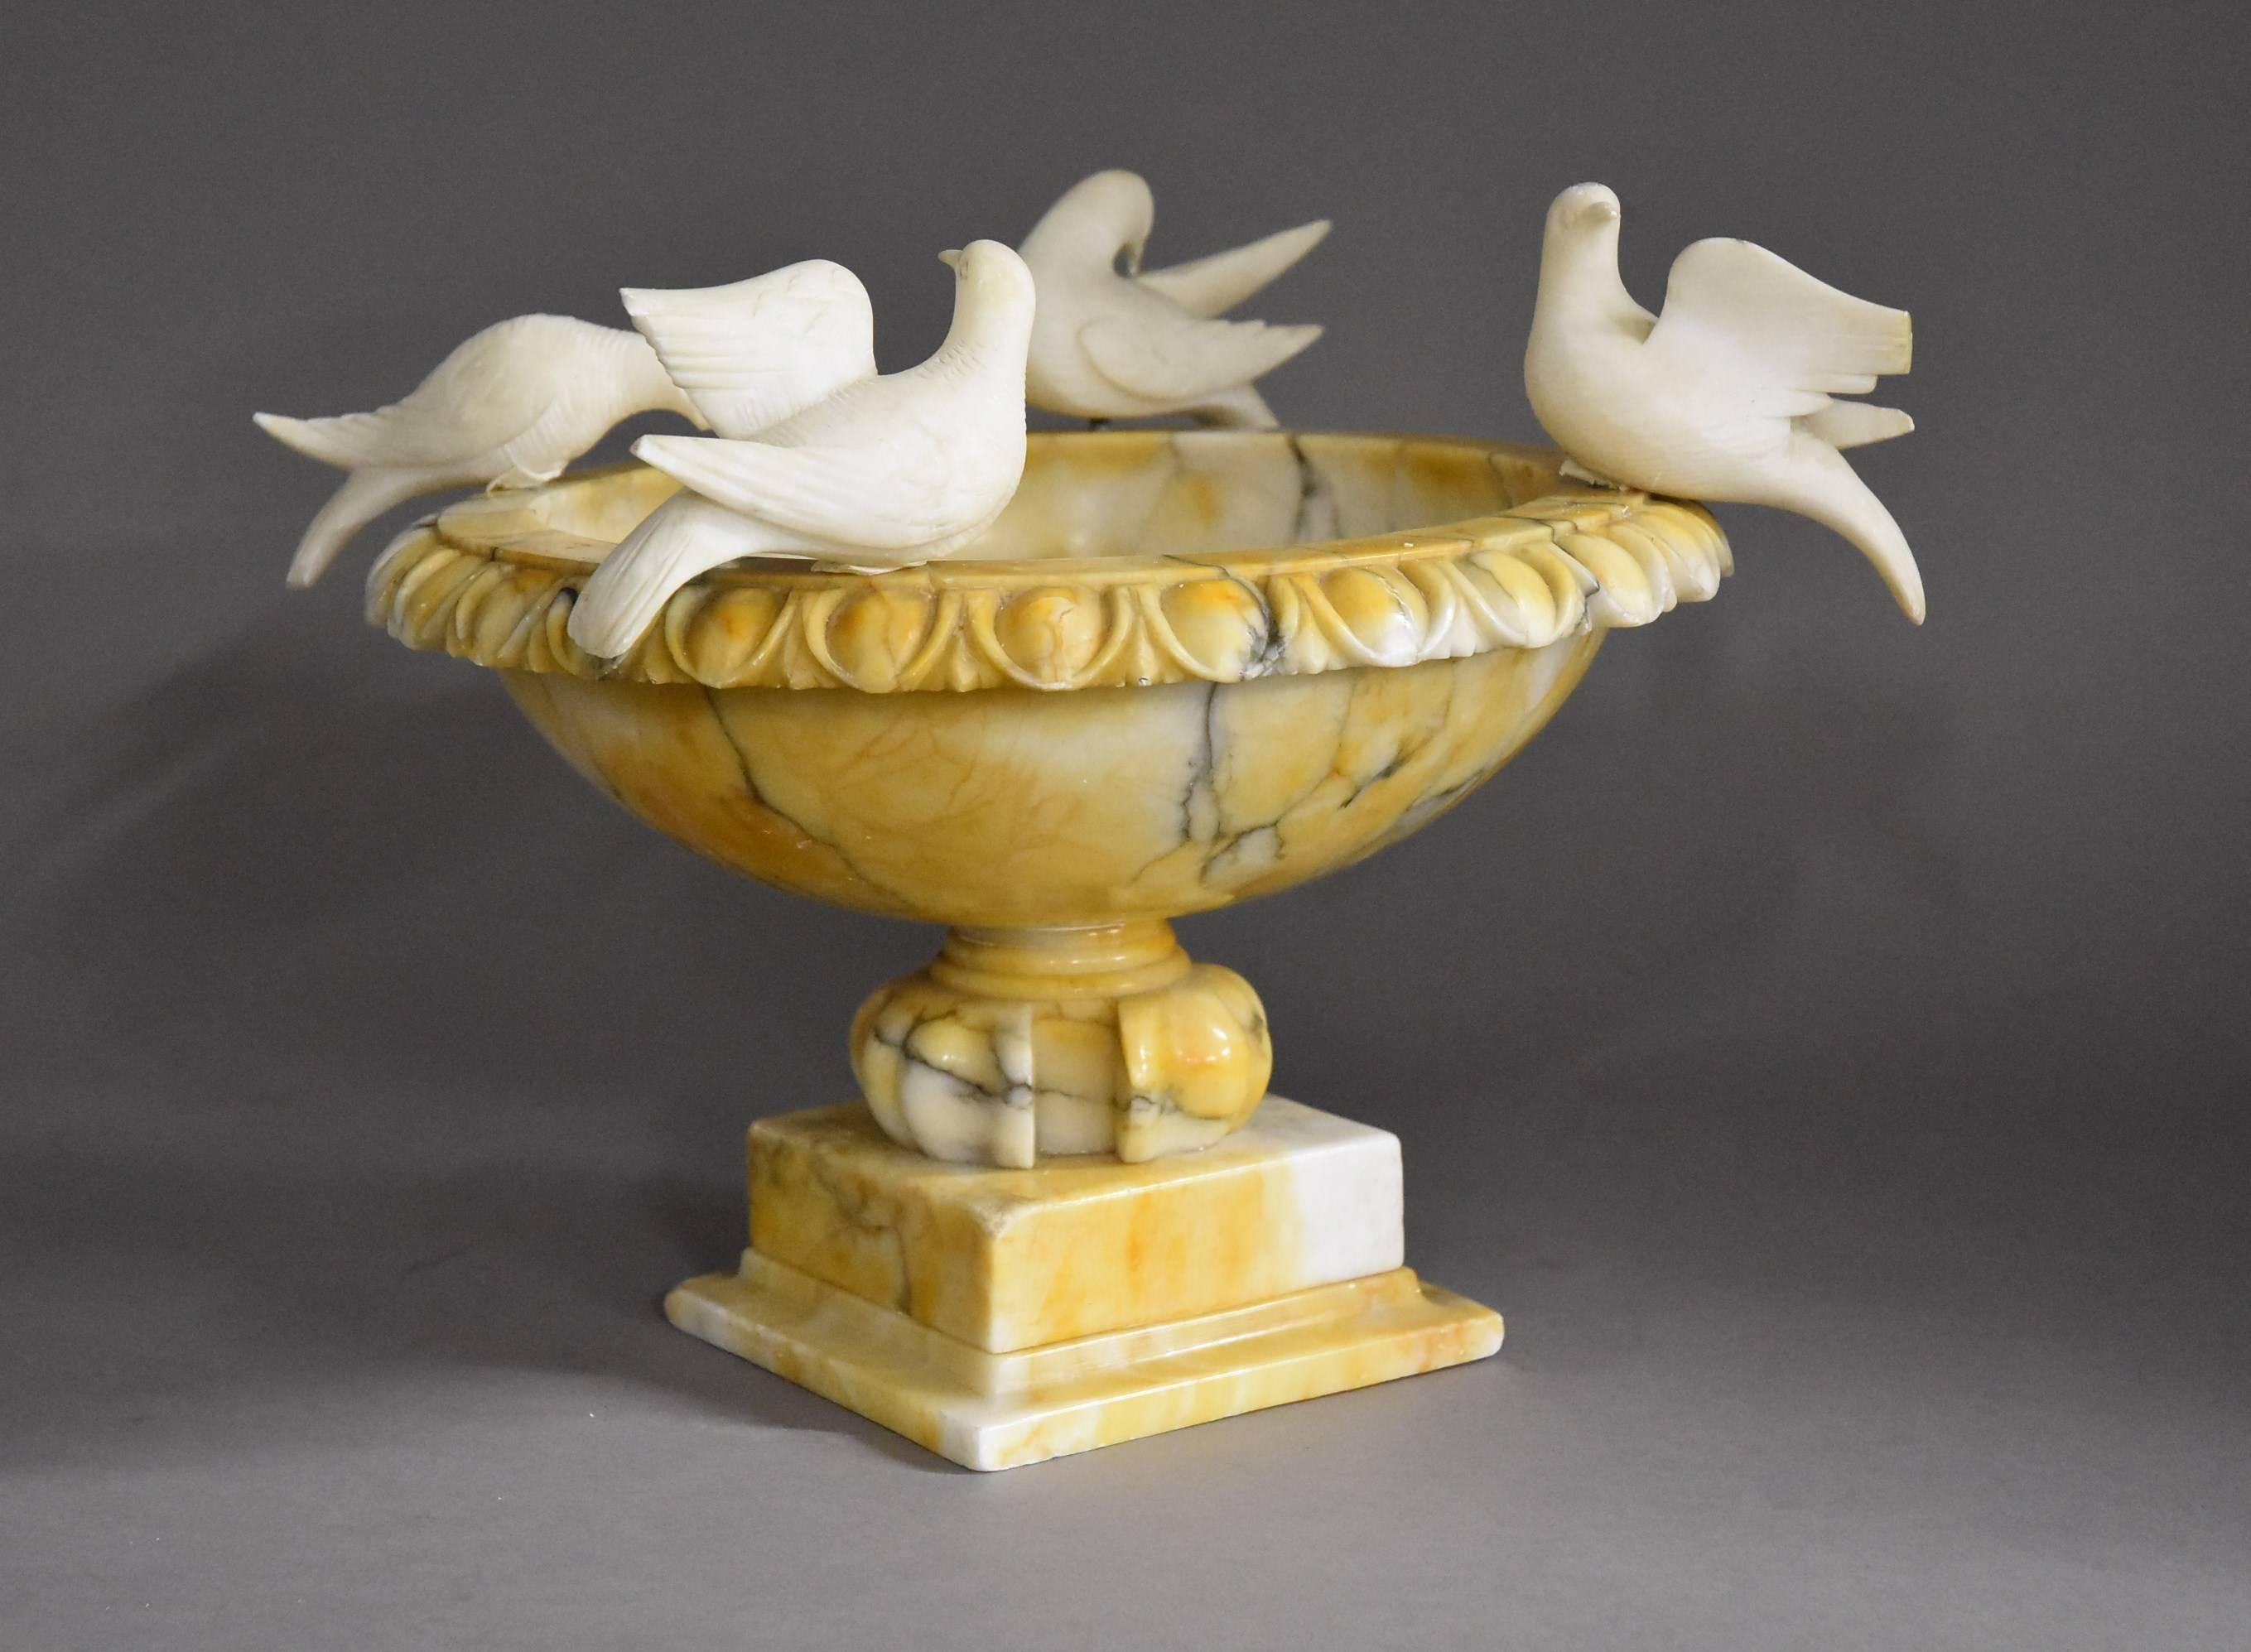 A highly decorative late 19th century alabaster tazza or birdbath. 

This tazza consists of four carved doves (symbolic of peace) surrounding the circular top with egg & dart carved decoration.

This leads down to the decorative carved base